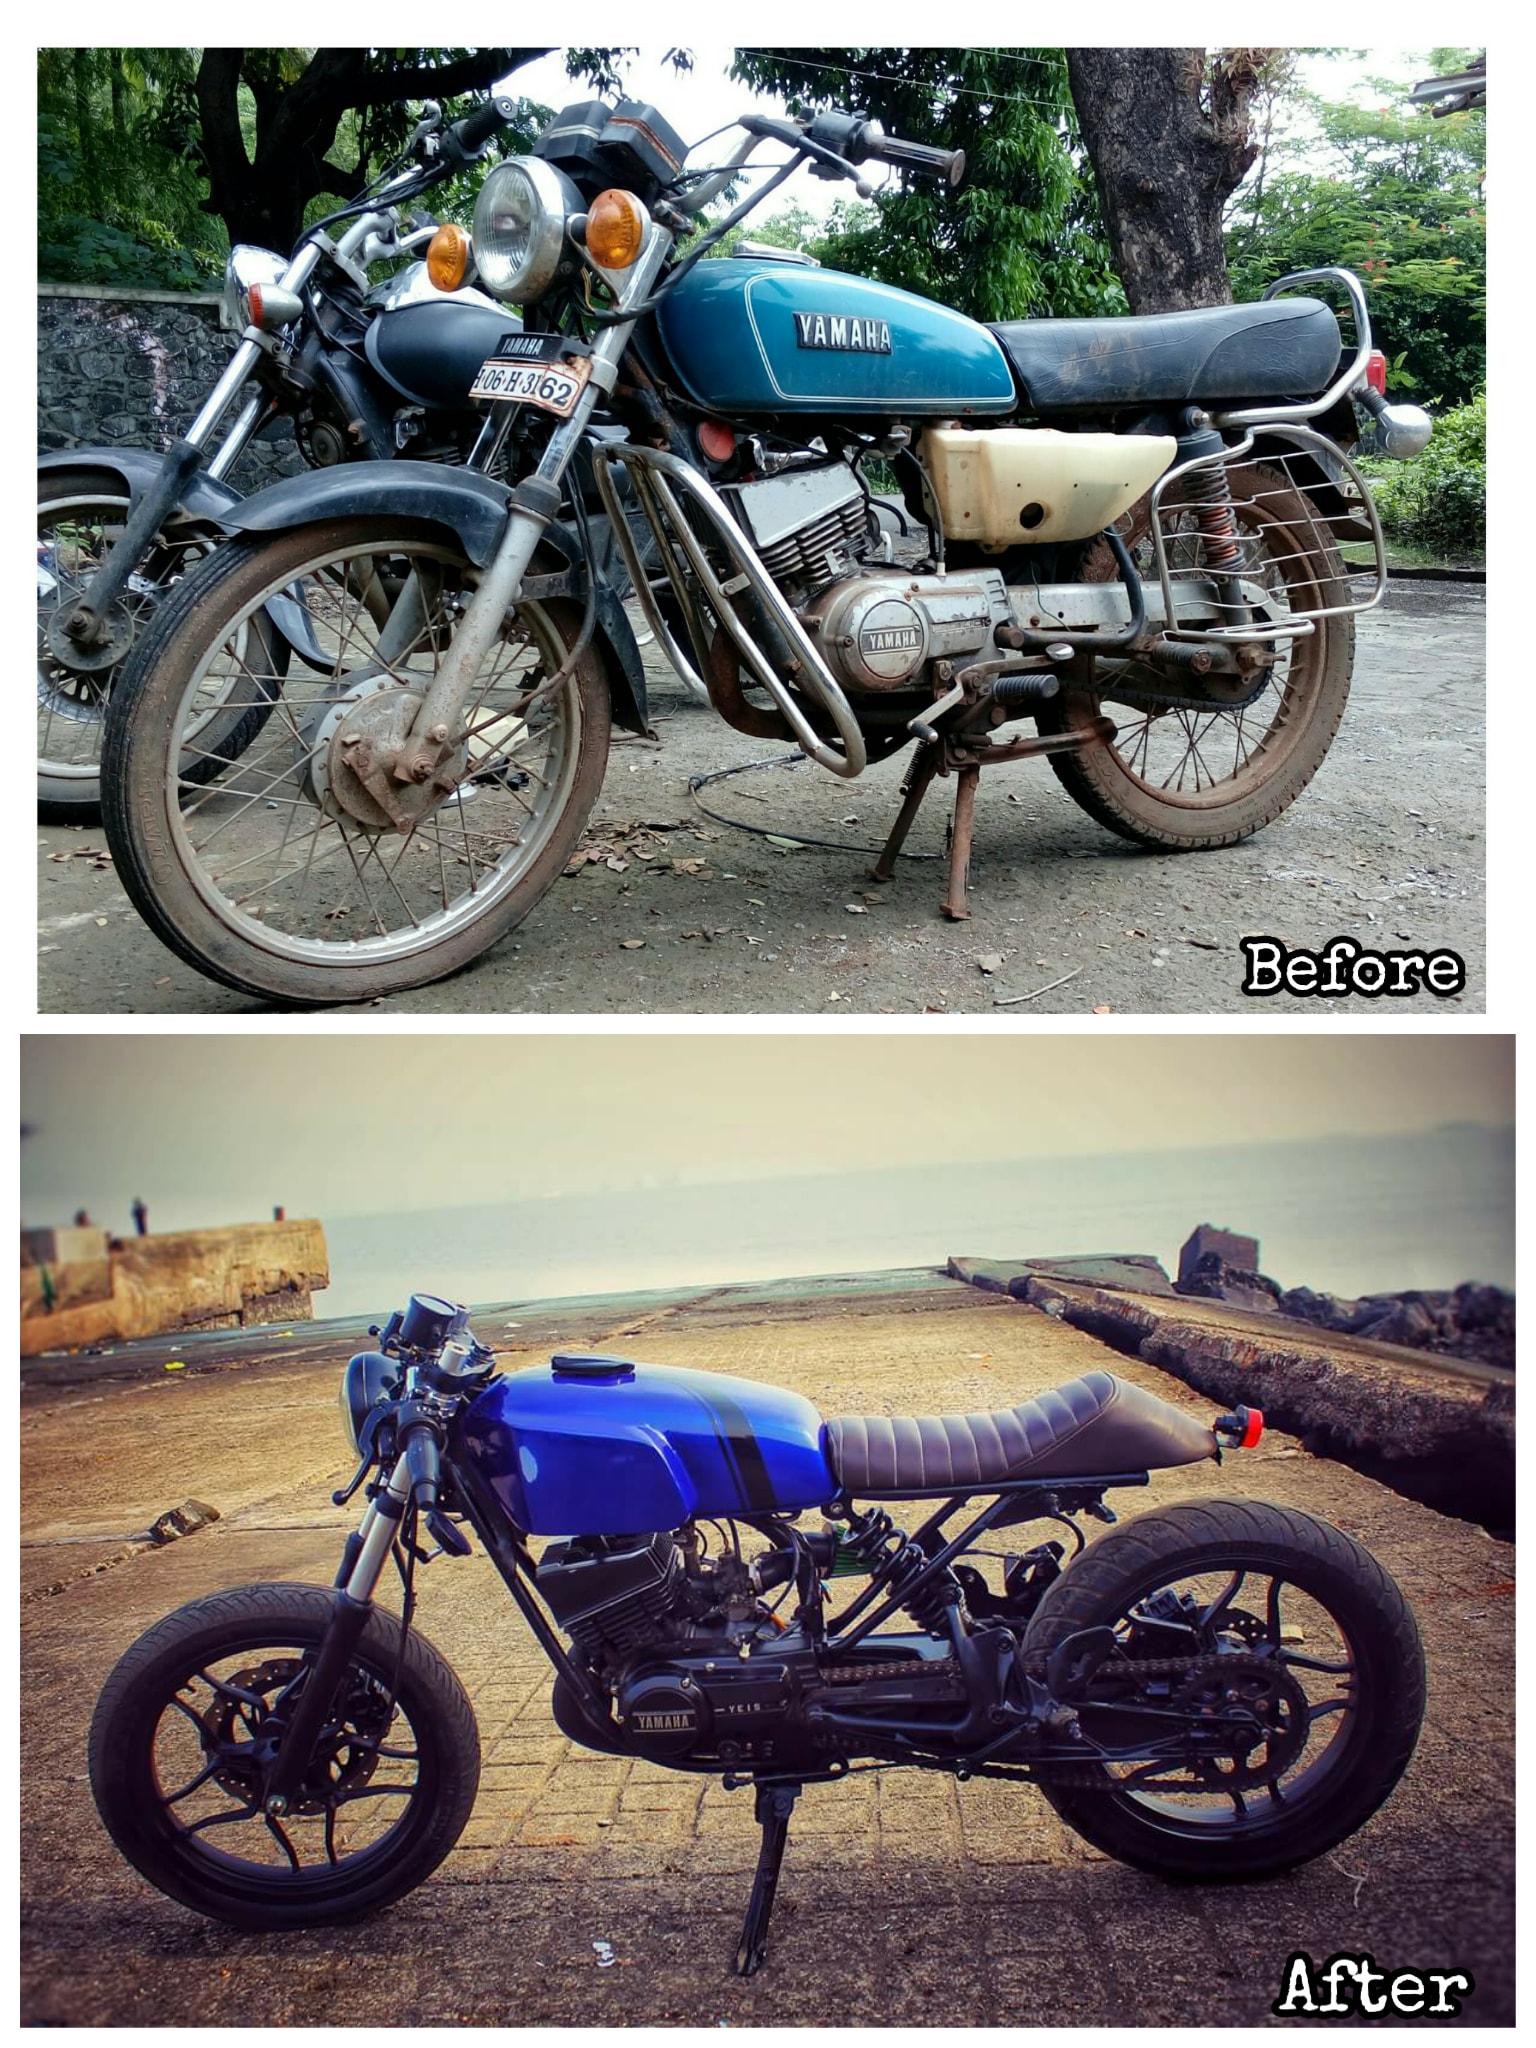 Perfectly Modified Yamaha RX135 Cafe Racer by Shivshahi Customs - pic